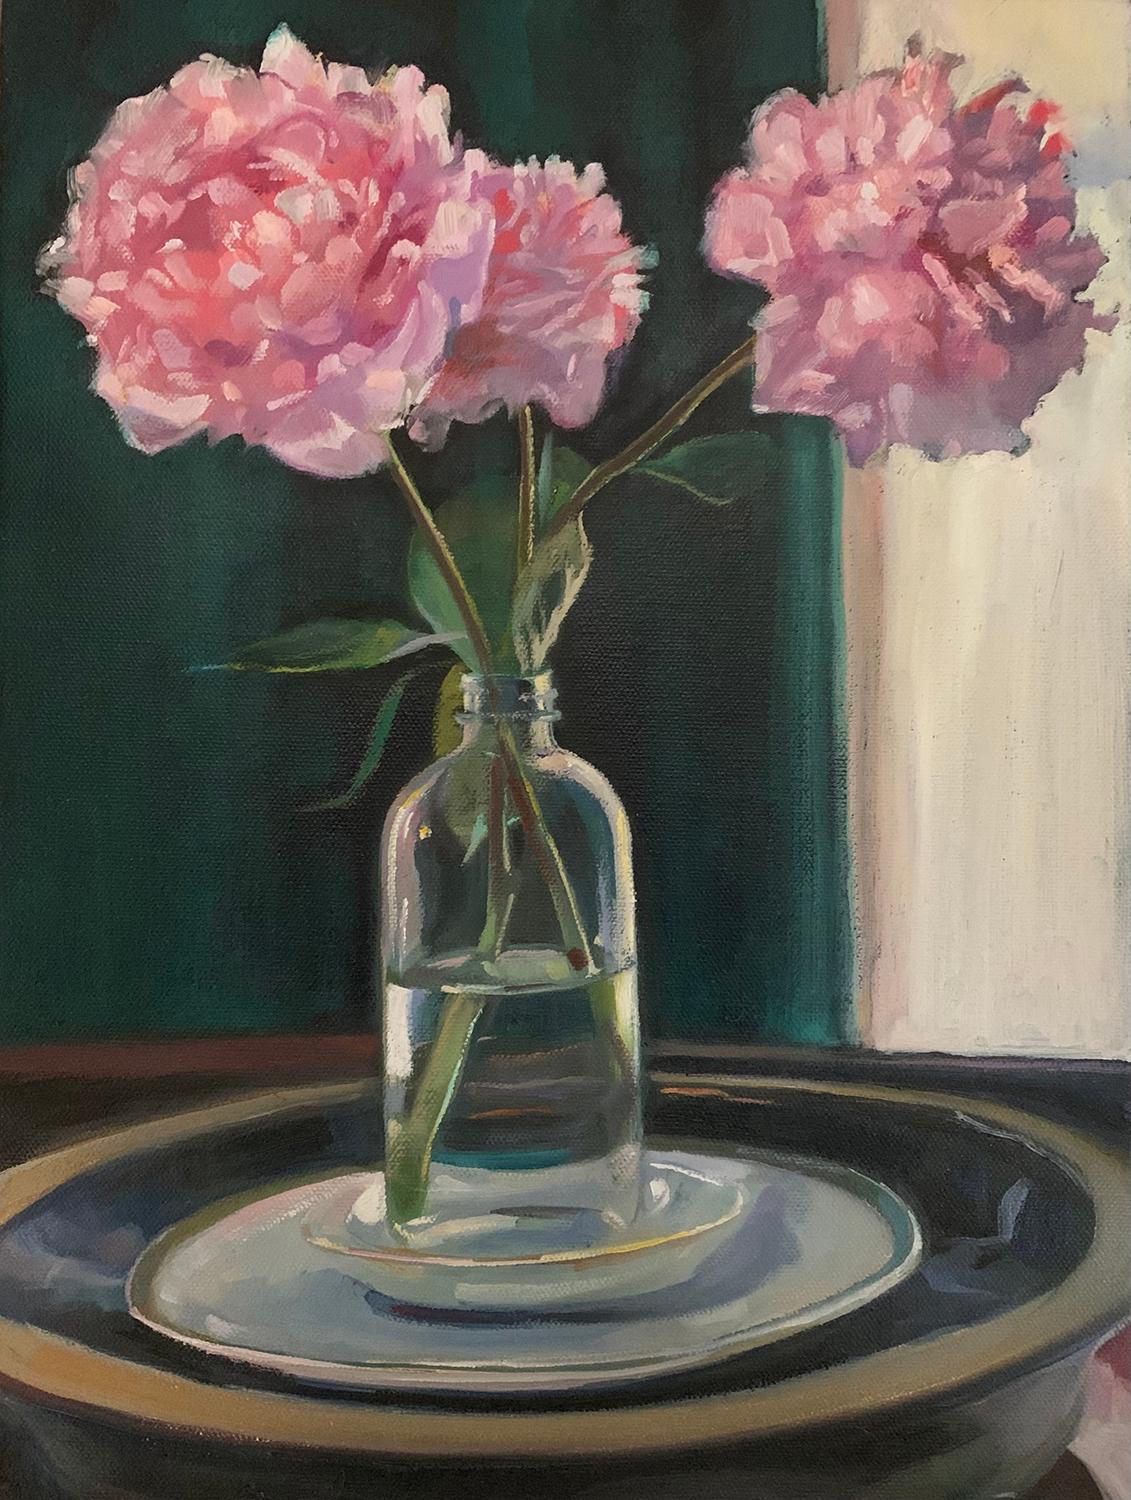 Still Life painting of a pink peony in a domestic setting
Painted by Hudson Valley based artist, Carl Grauer, in 2022
oil on canvas
16 x 12 inches, 19.5 x 15.5 inches with an artist-made wood frame (painted grey-lavender to complement the undertones